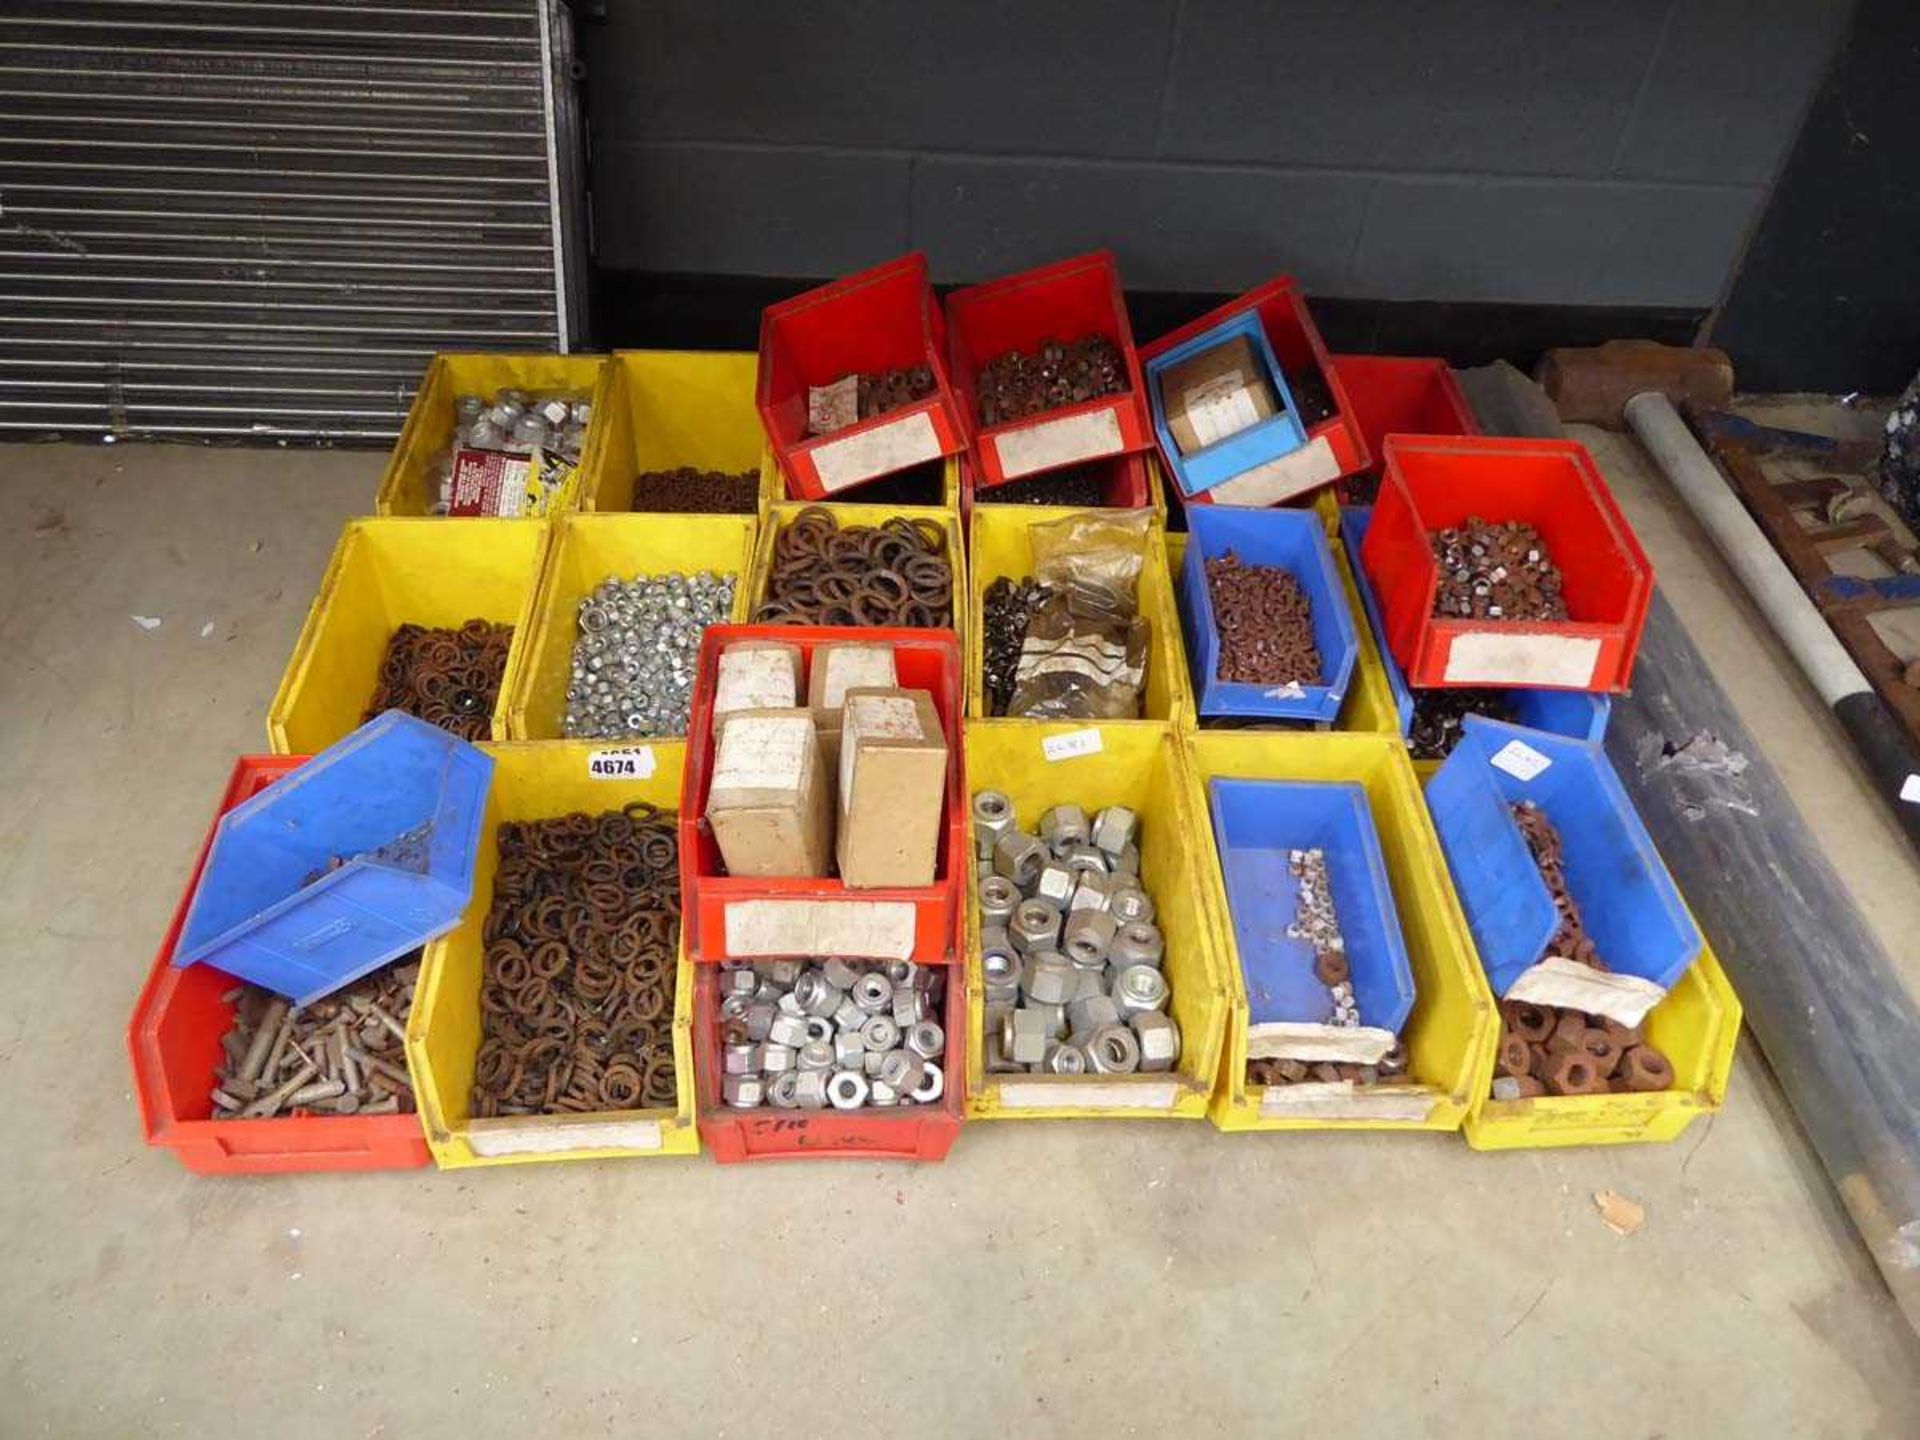 Quarter of a bay of assorted nuts, bolts, washers, etc